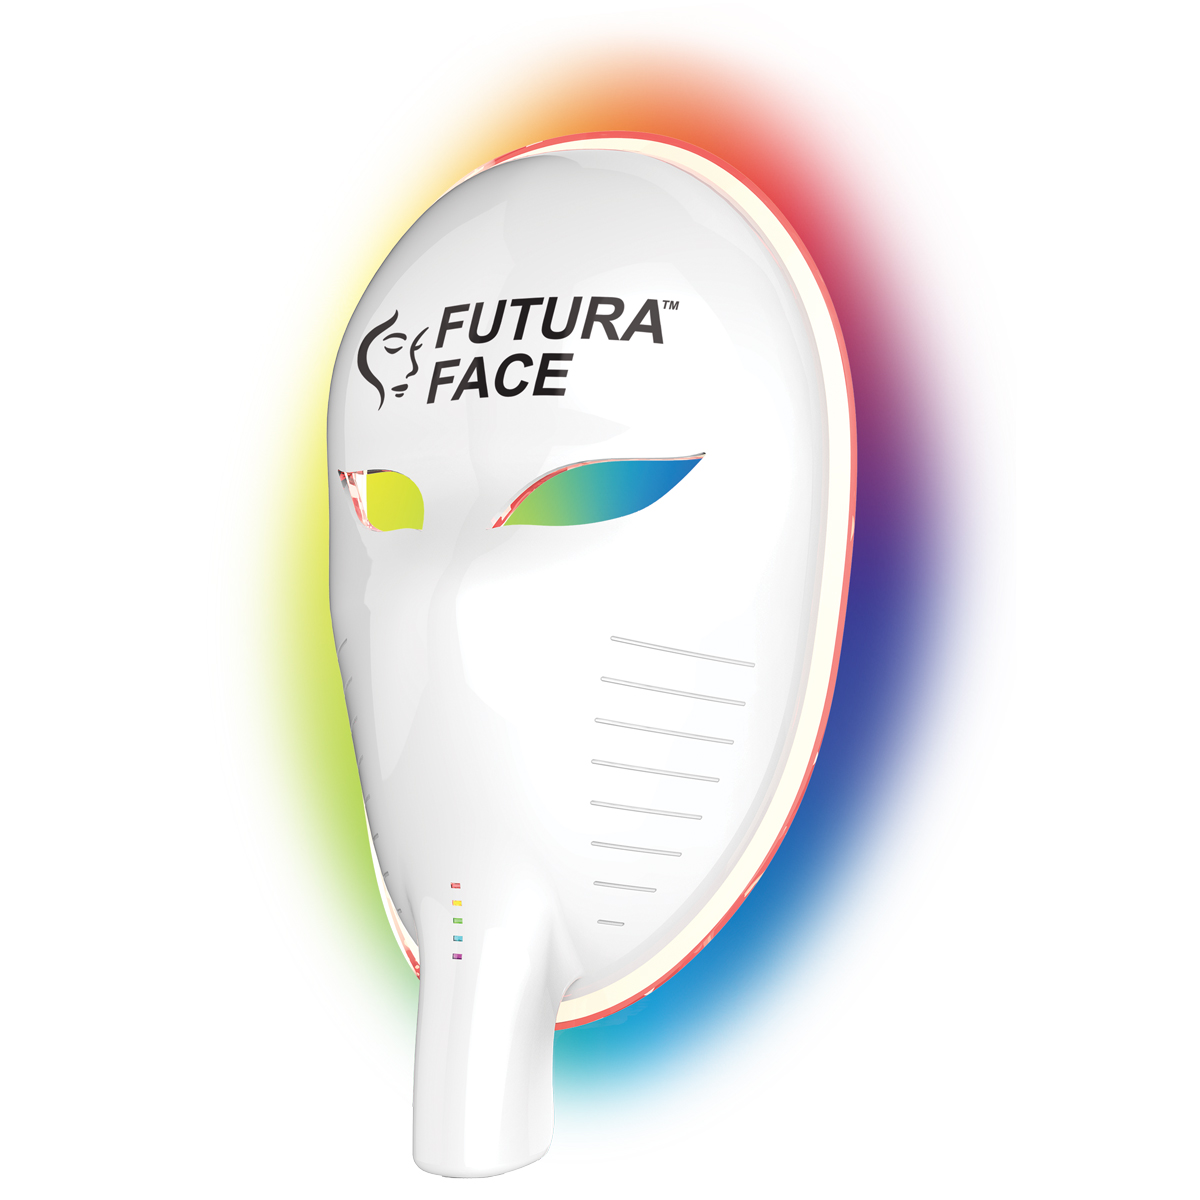 Futura Face LED light therapy and teeth whitening machine mask